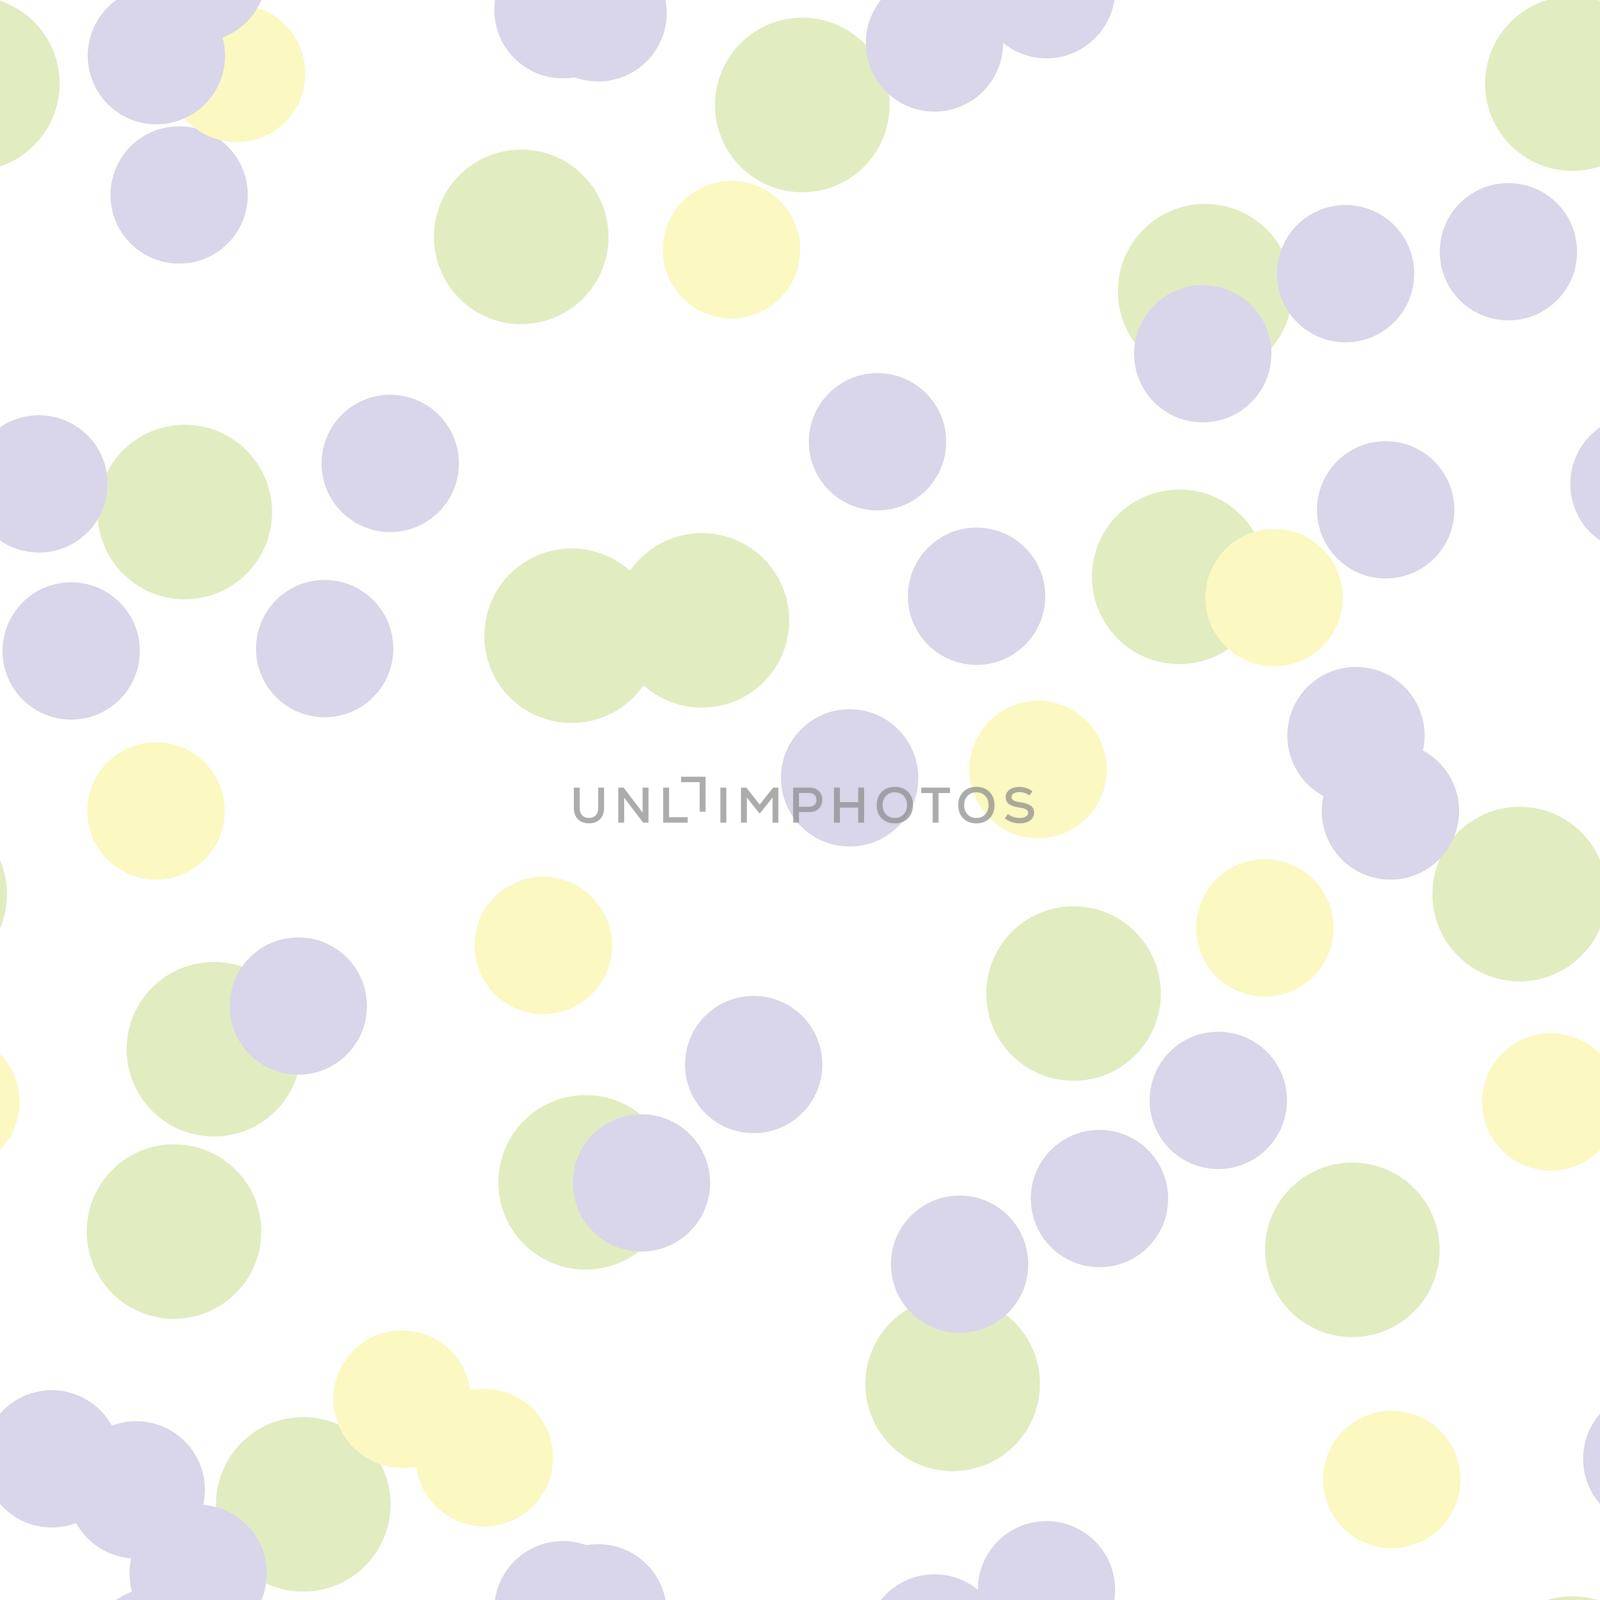 Multicolored circles on a light background. Seamless endless pattern pattern of circles in yellow purple, green color